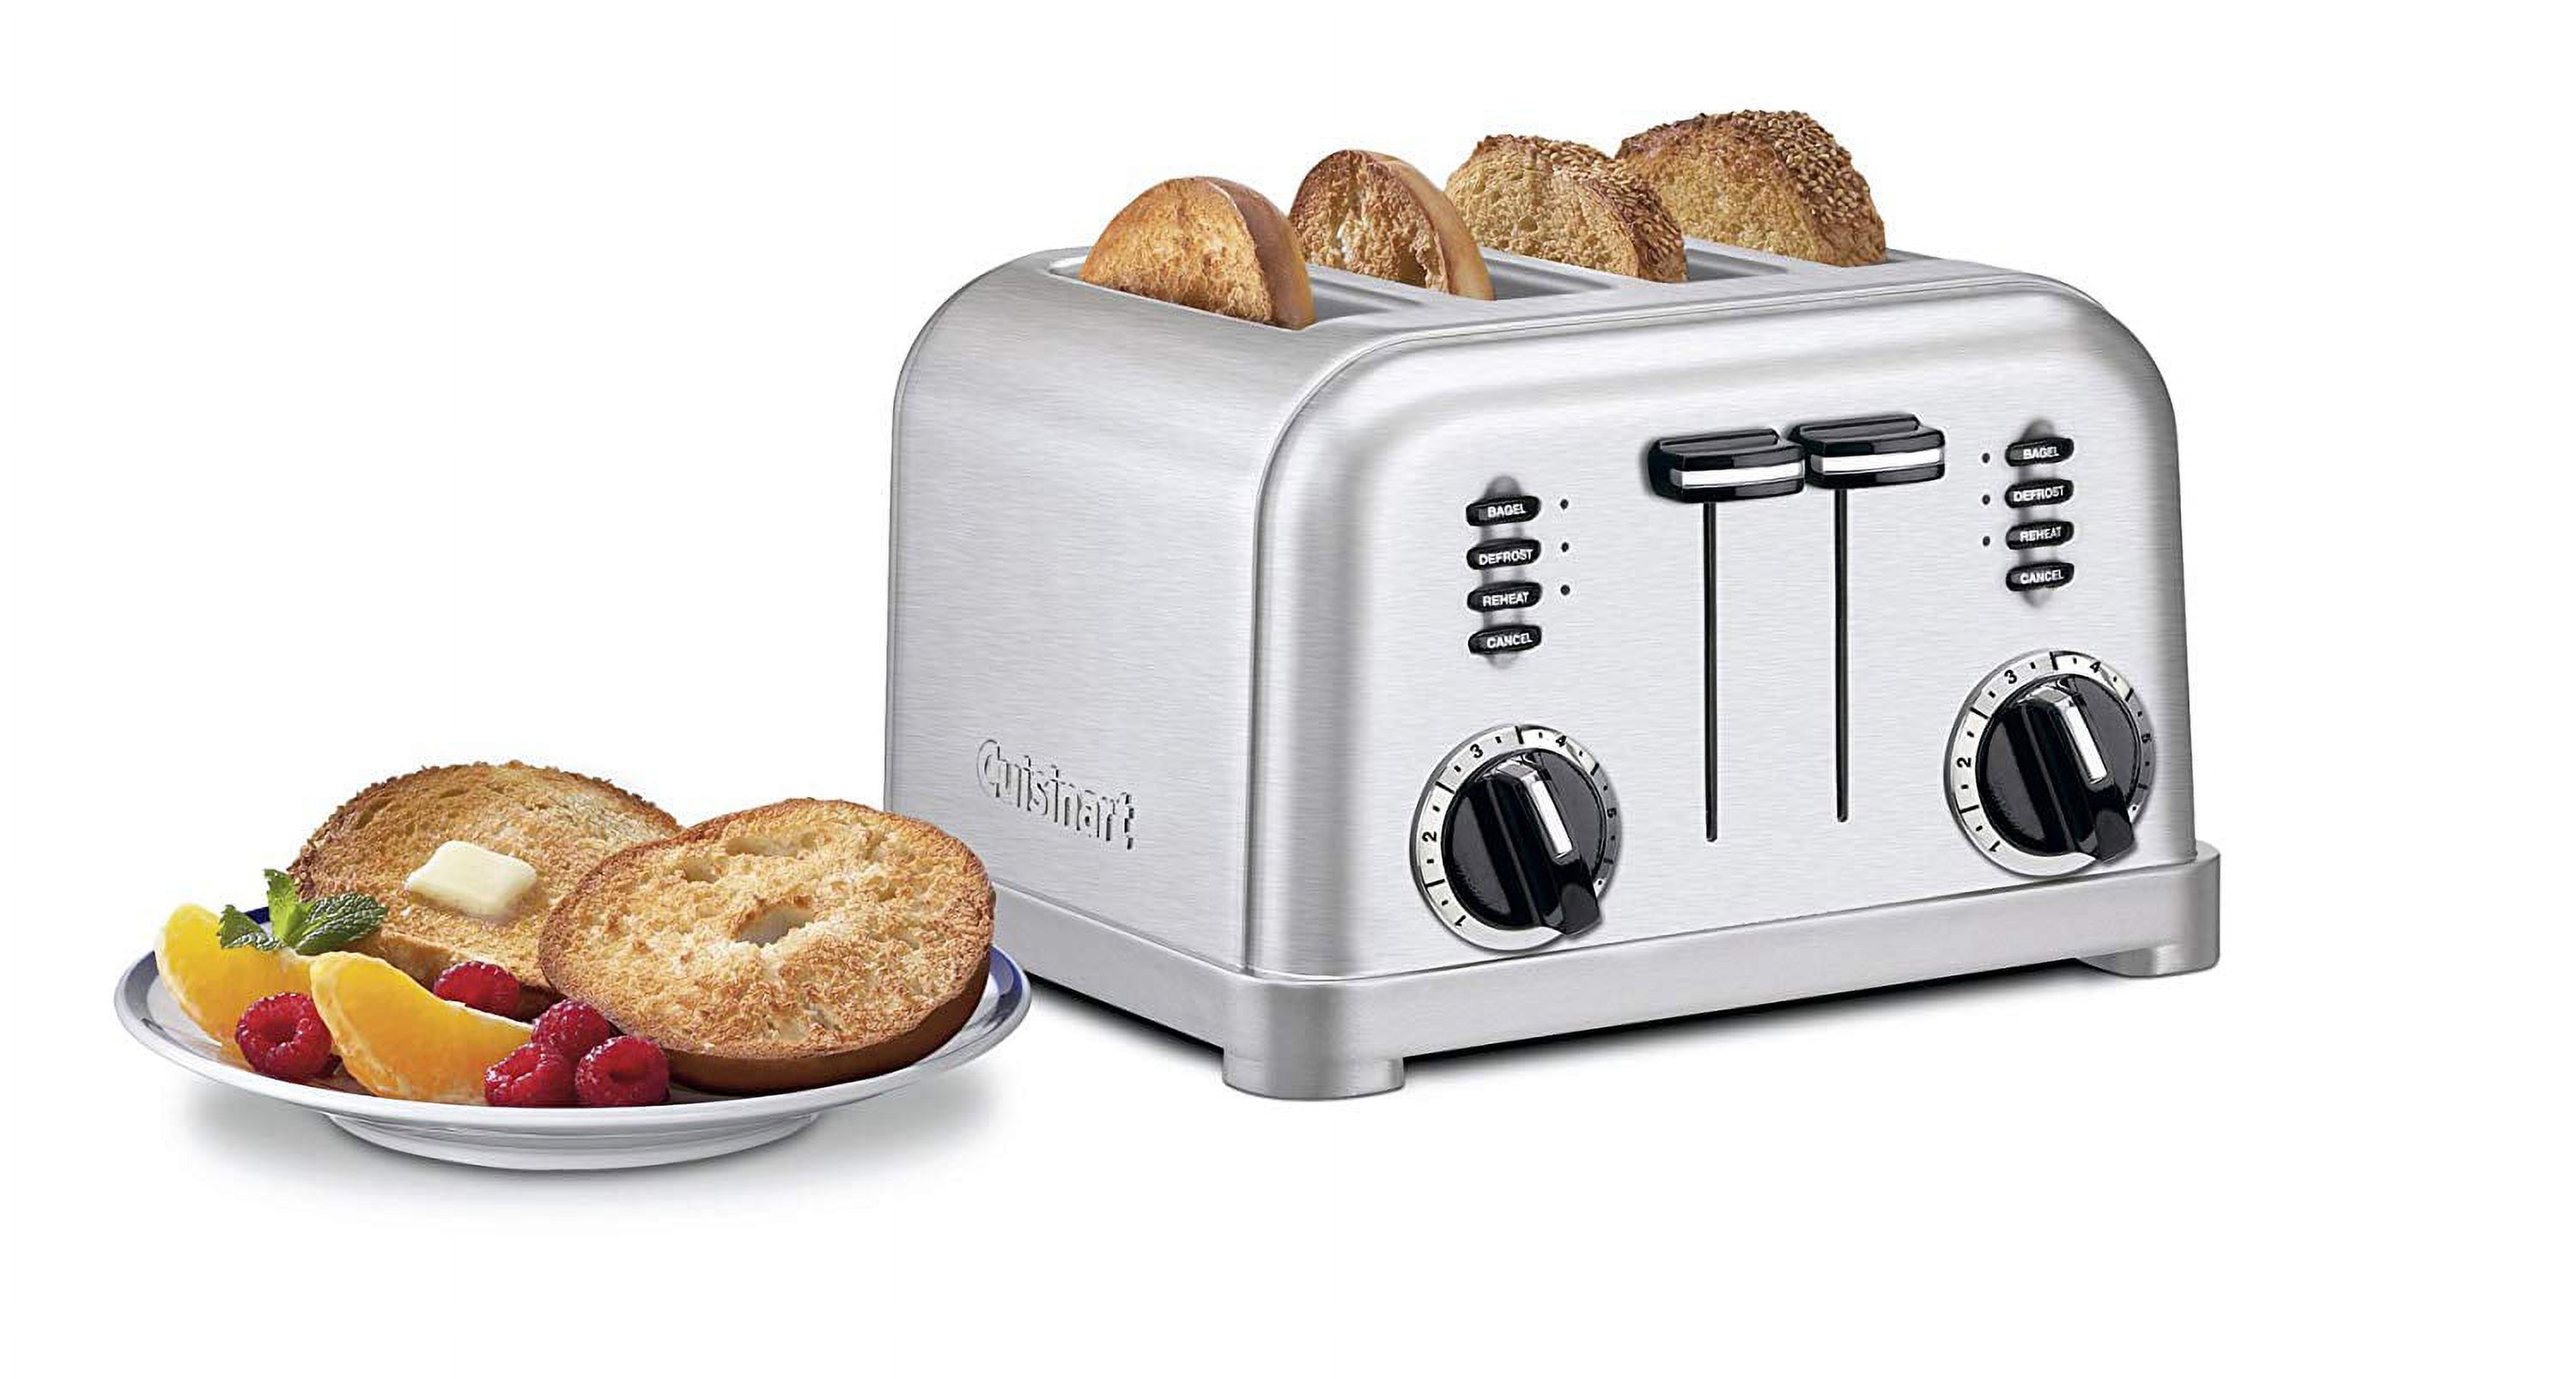 Cuisinart Brushed Stainless 4 Slice Classic Toaster - image 5 of 6